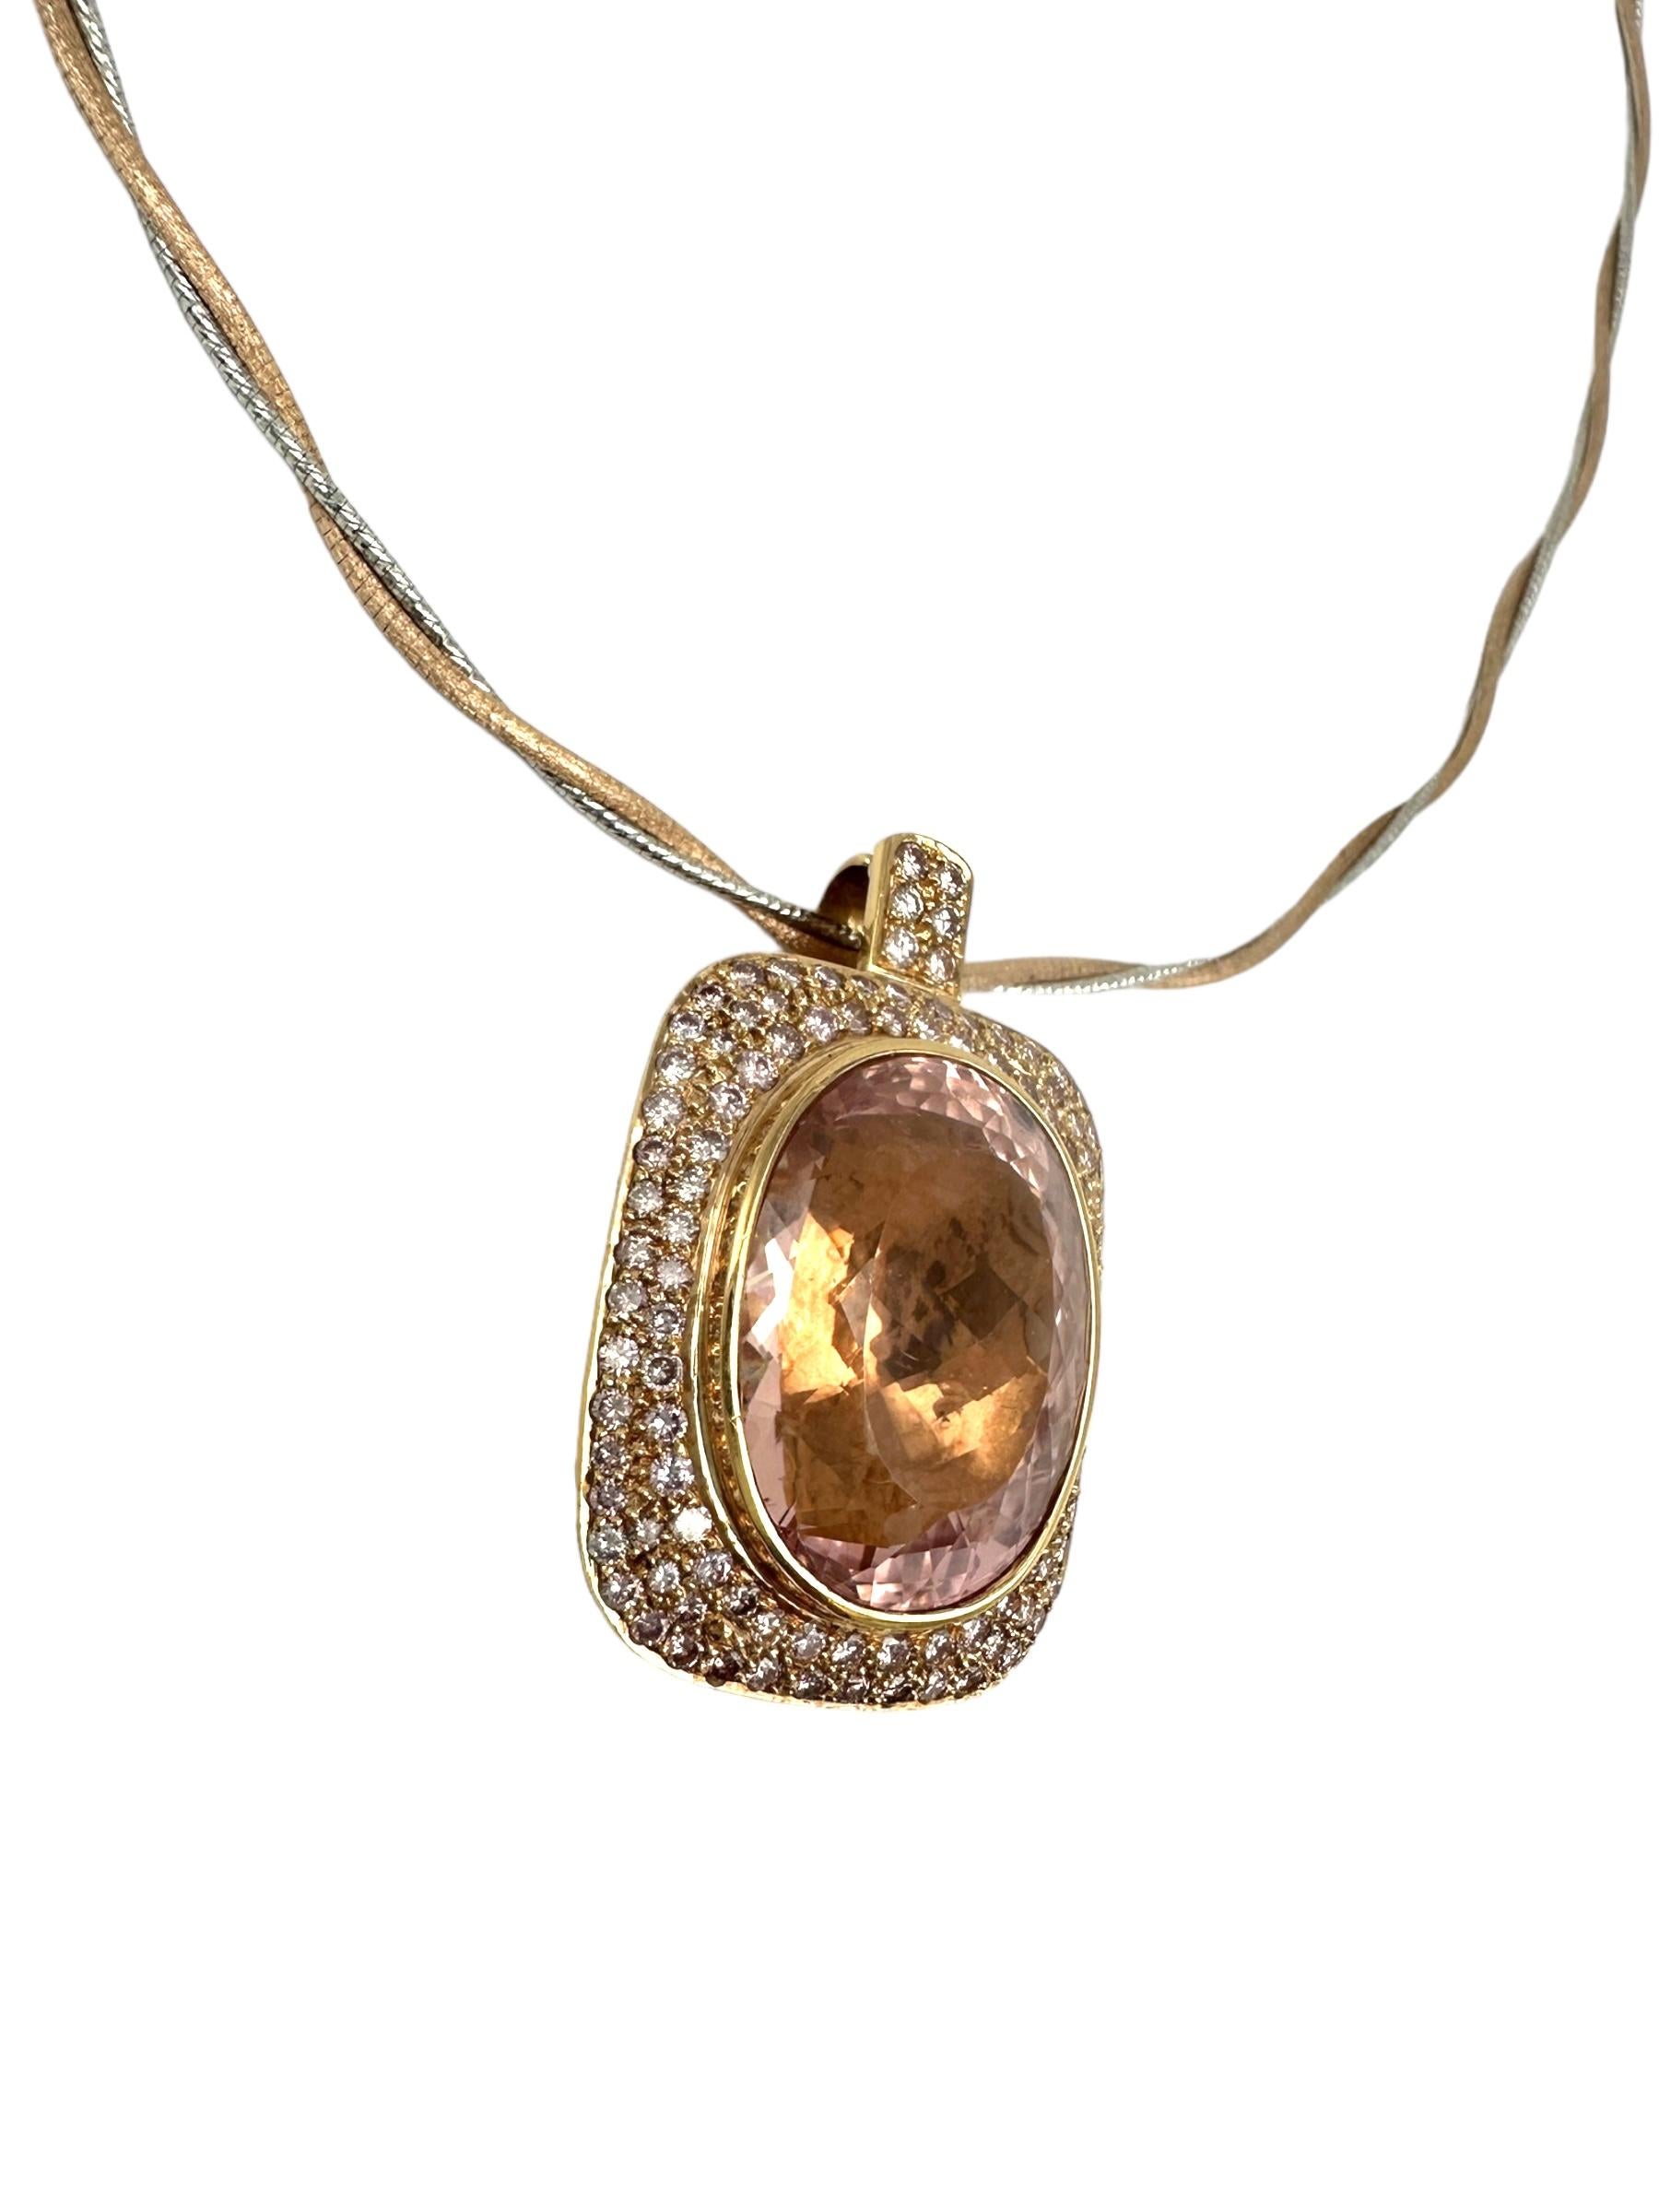 This custom-made 18 Karat Rose Gold necklace features a stunning 44.37-carat Morganite gemstone with a halo of 4.00 carats of round brilliant diamonds. The oval-cut gemstone is expertly faceted for maximum sparkle, making it an eye-catching piece.